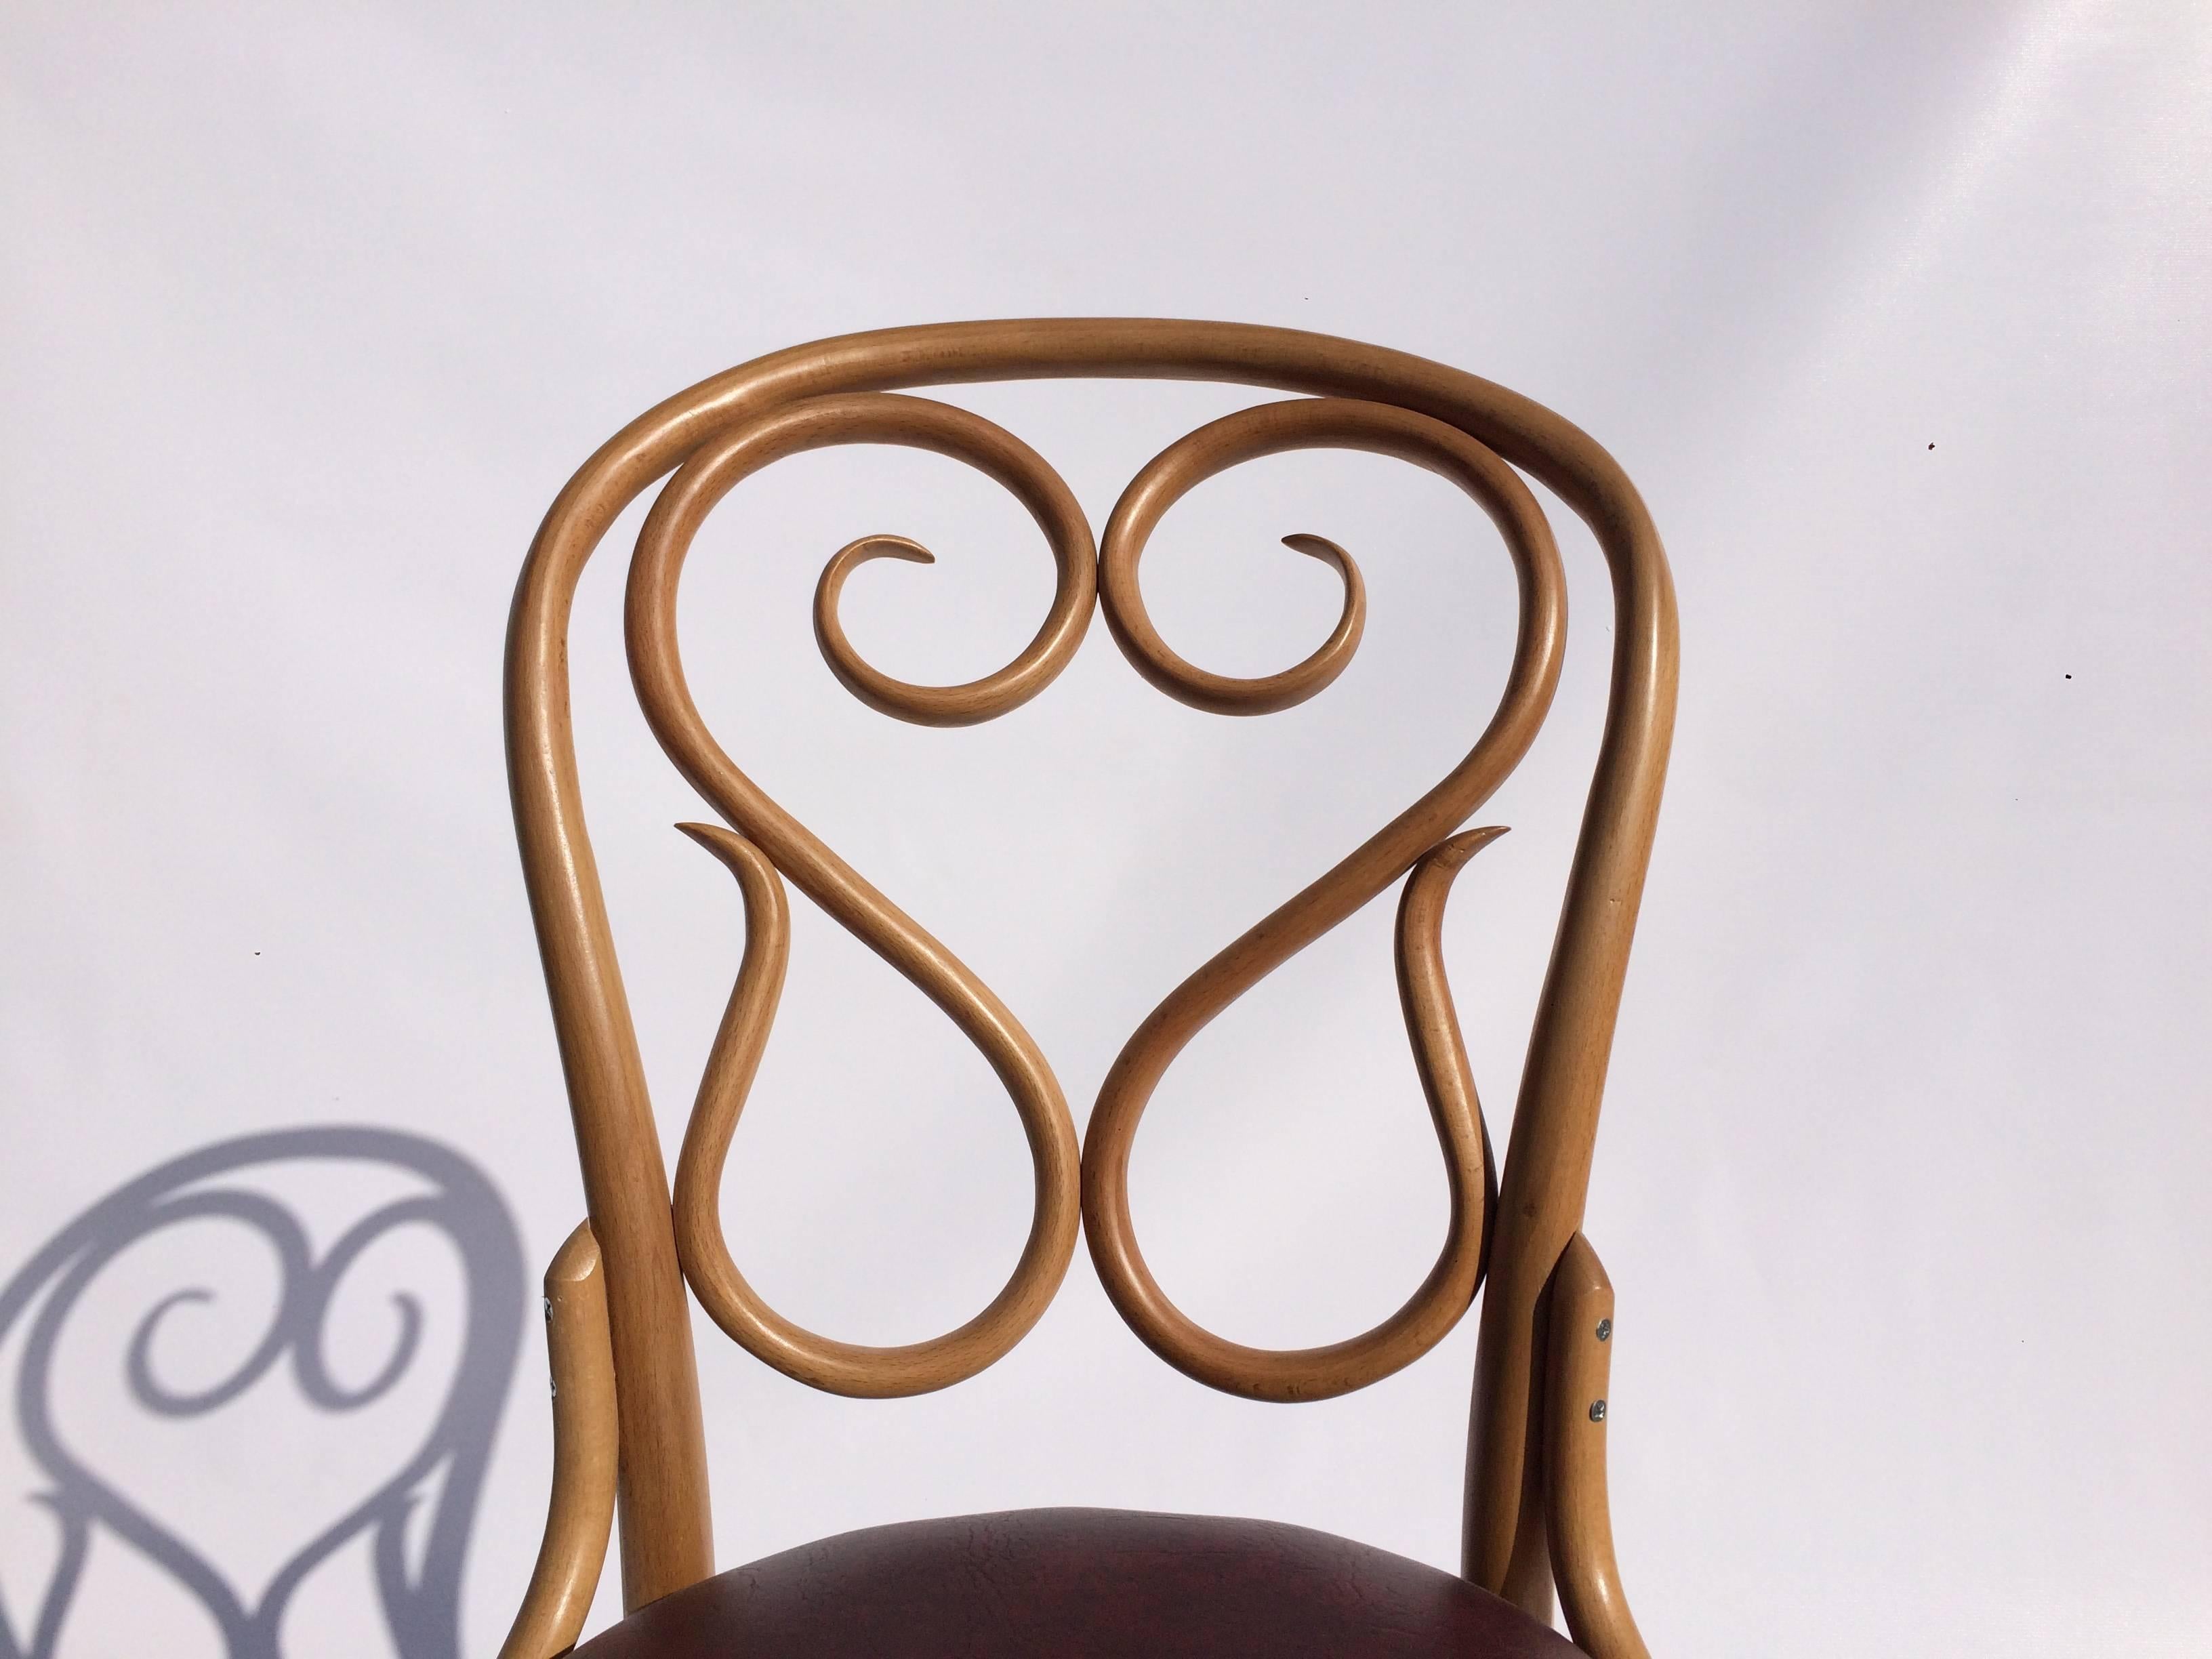 Beautiful chairs, seats can be easily recovered to fit your decor. Set of four.